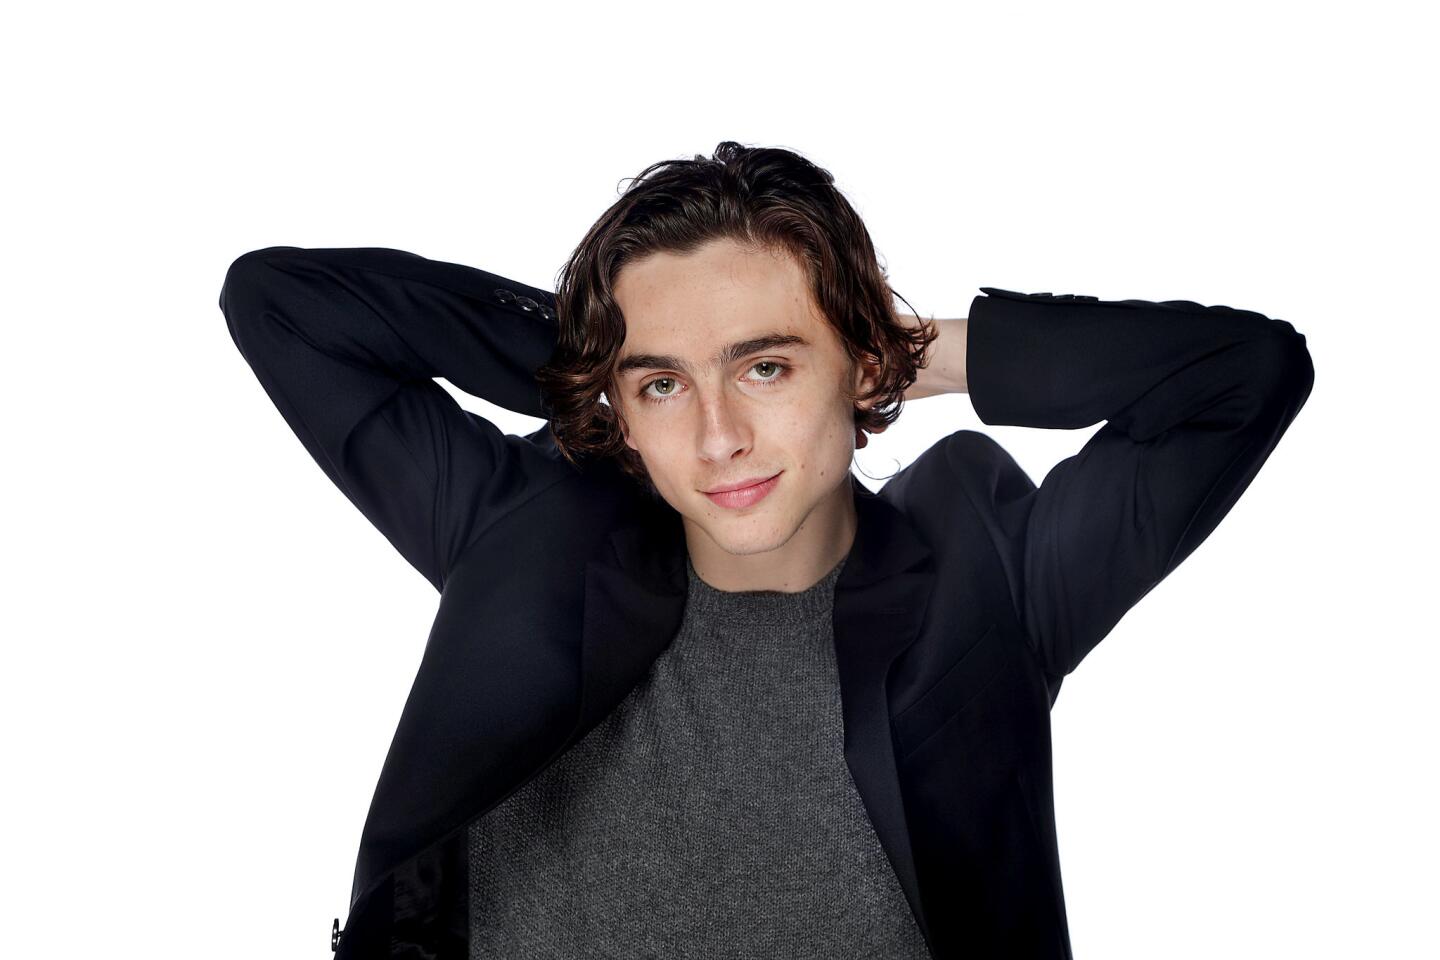 Timothee Chalamet, "Call Me By Your Name" Full coverage of the 2018 Oscar nominations